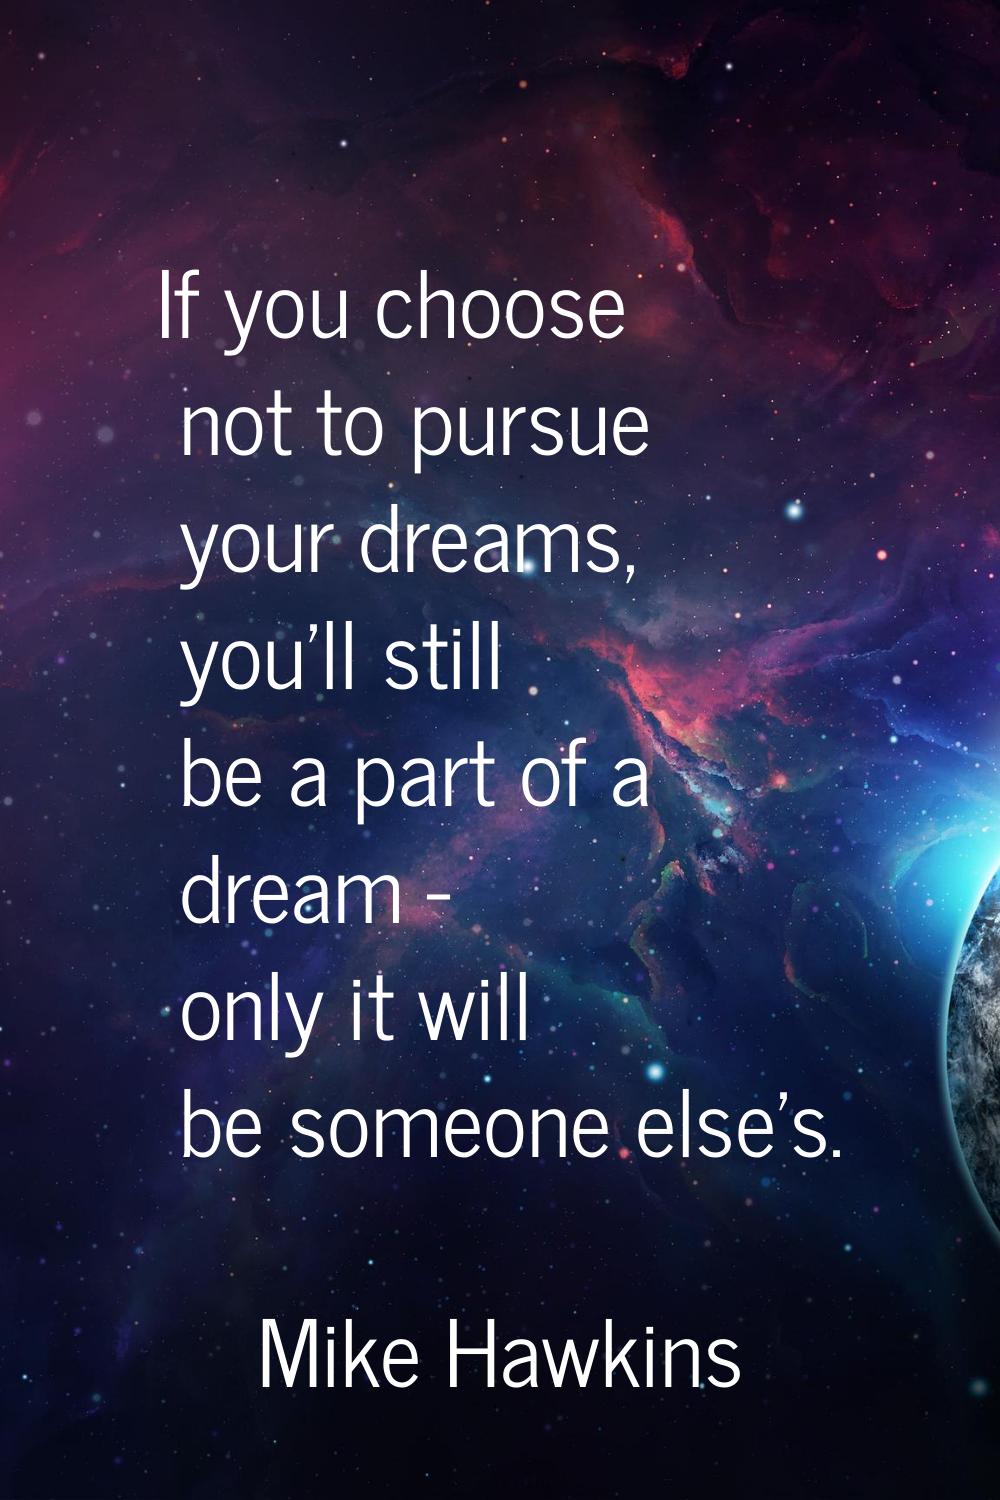 If you choose not to pursue your dreams, you'll still be a part of a dream - only it will be someon